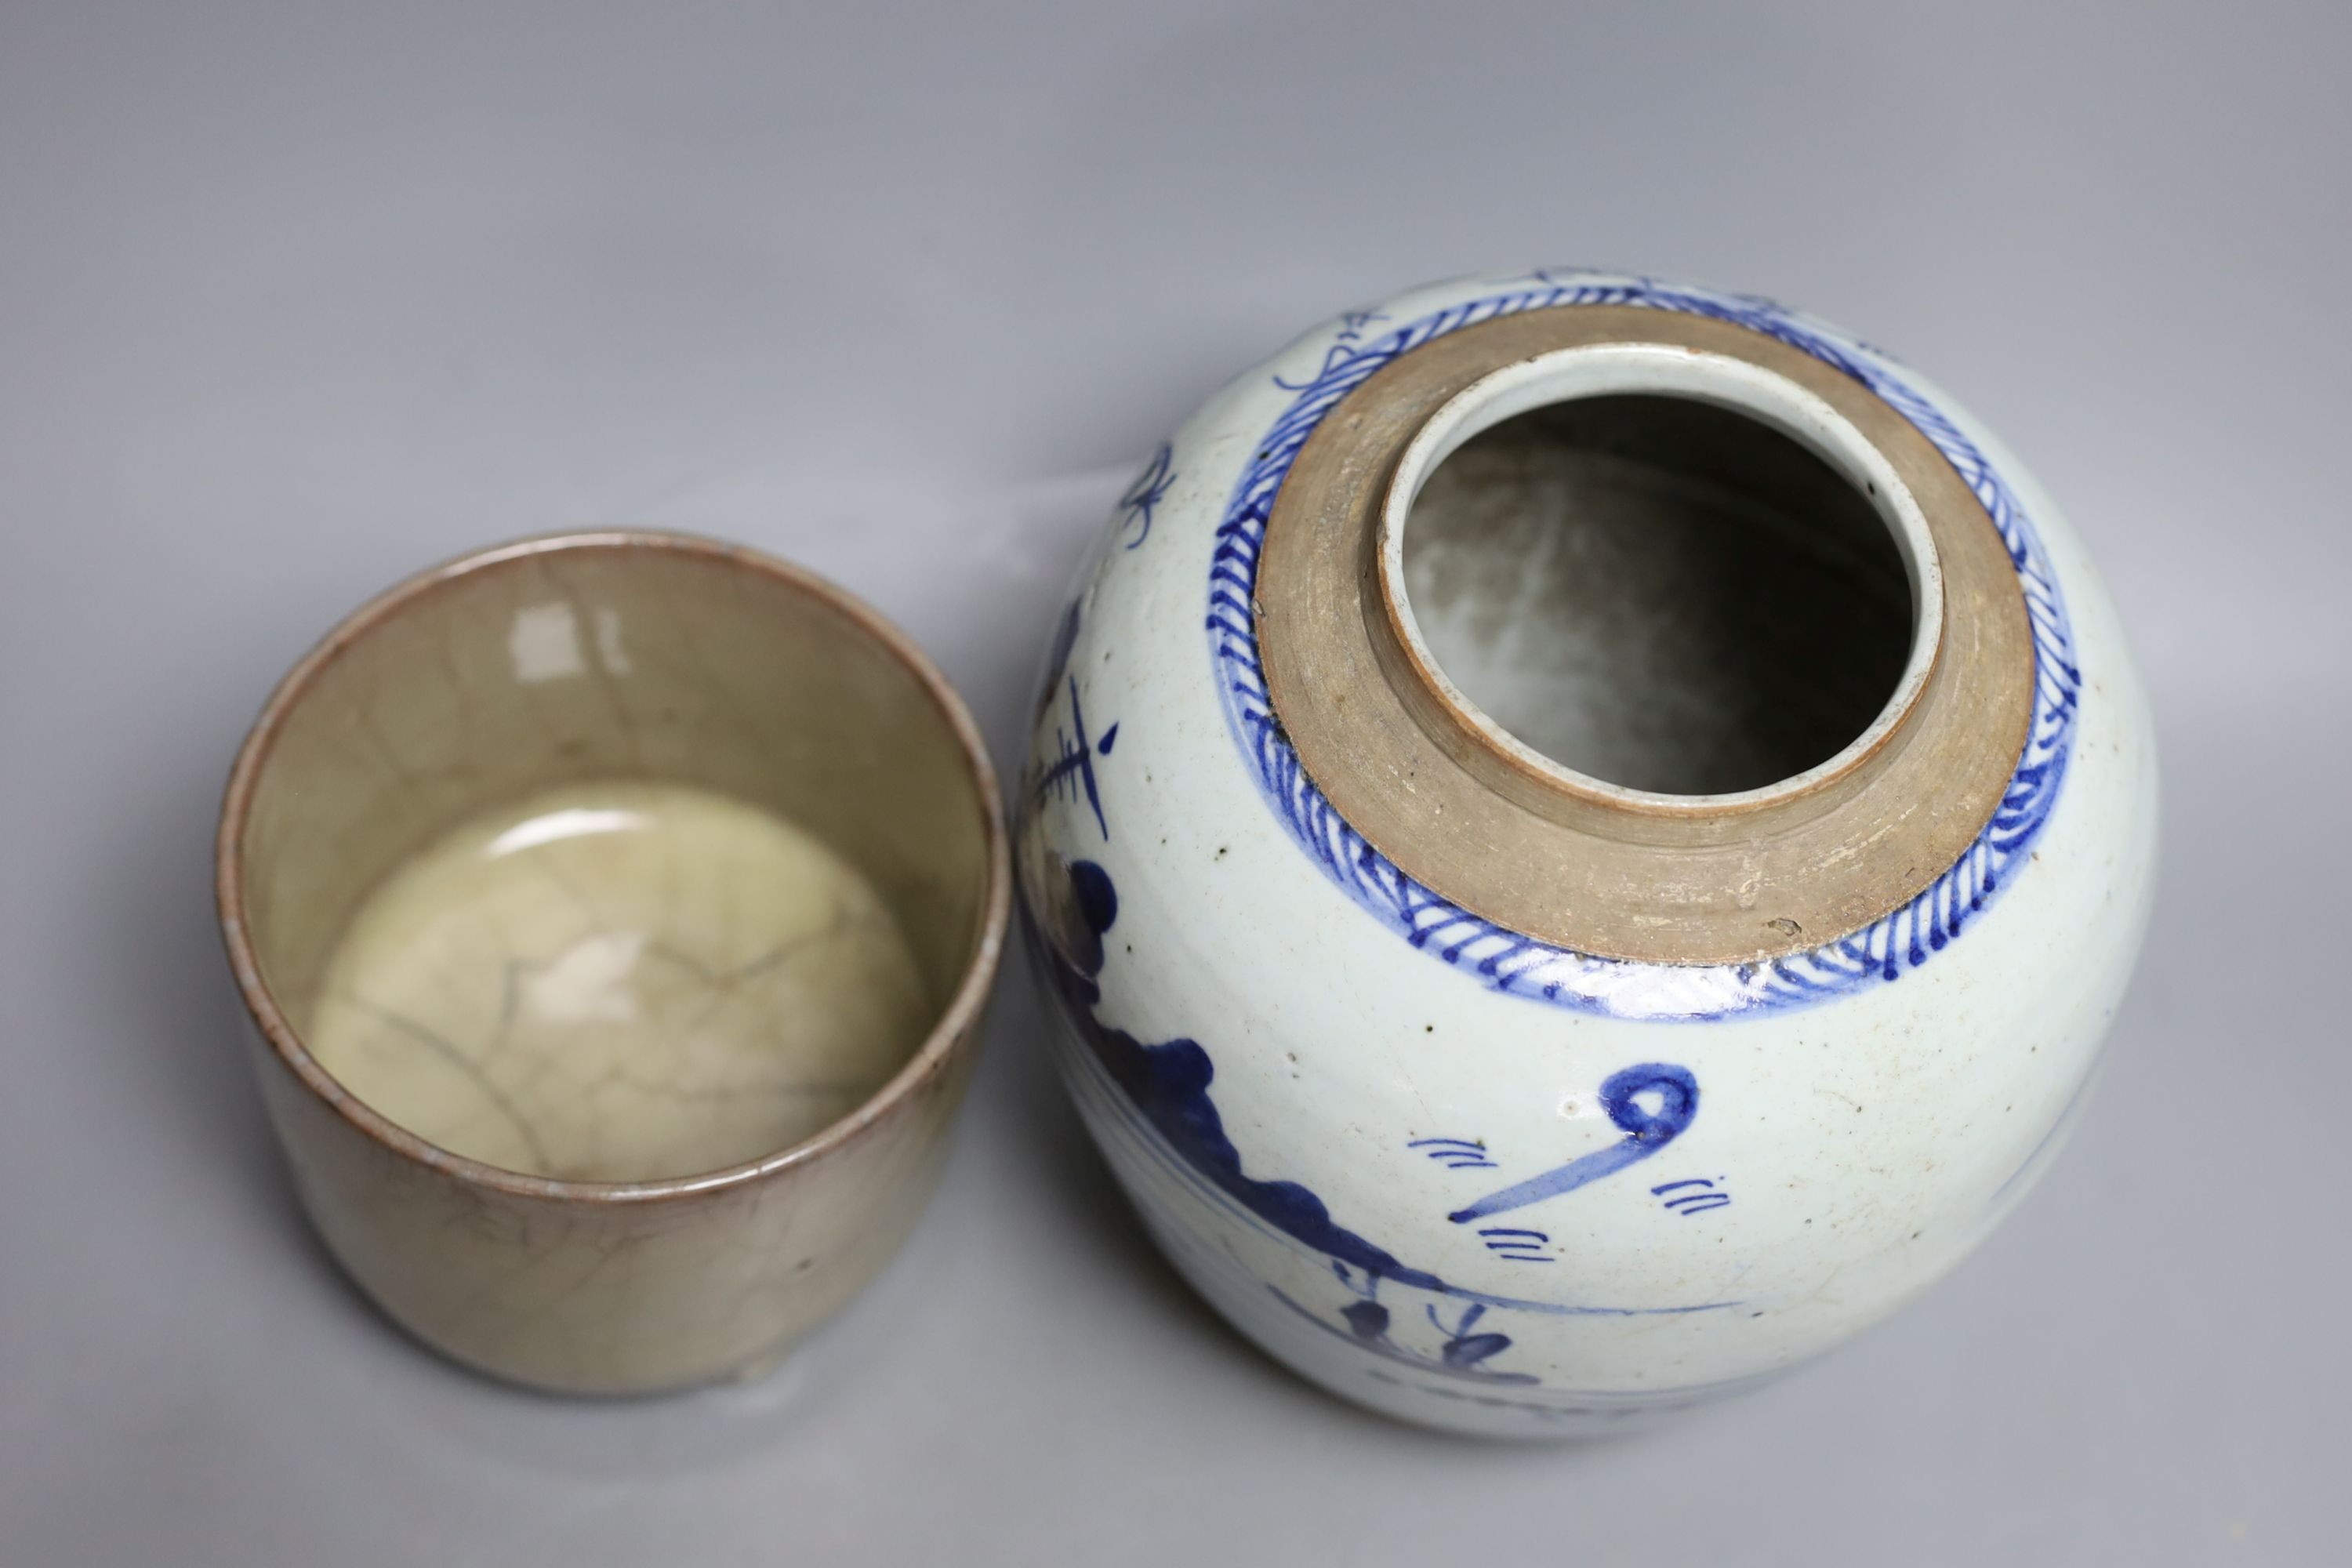 A 19th century Chinese blue and white jar depicting a village scene, together with a Chinese crackle glaze tripod censer - tallest 19cm